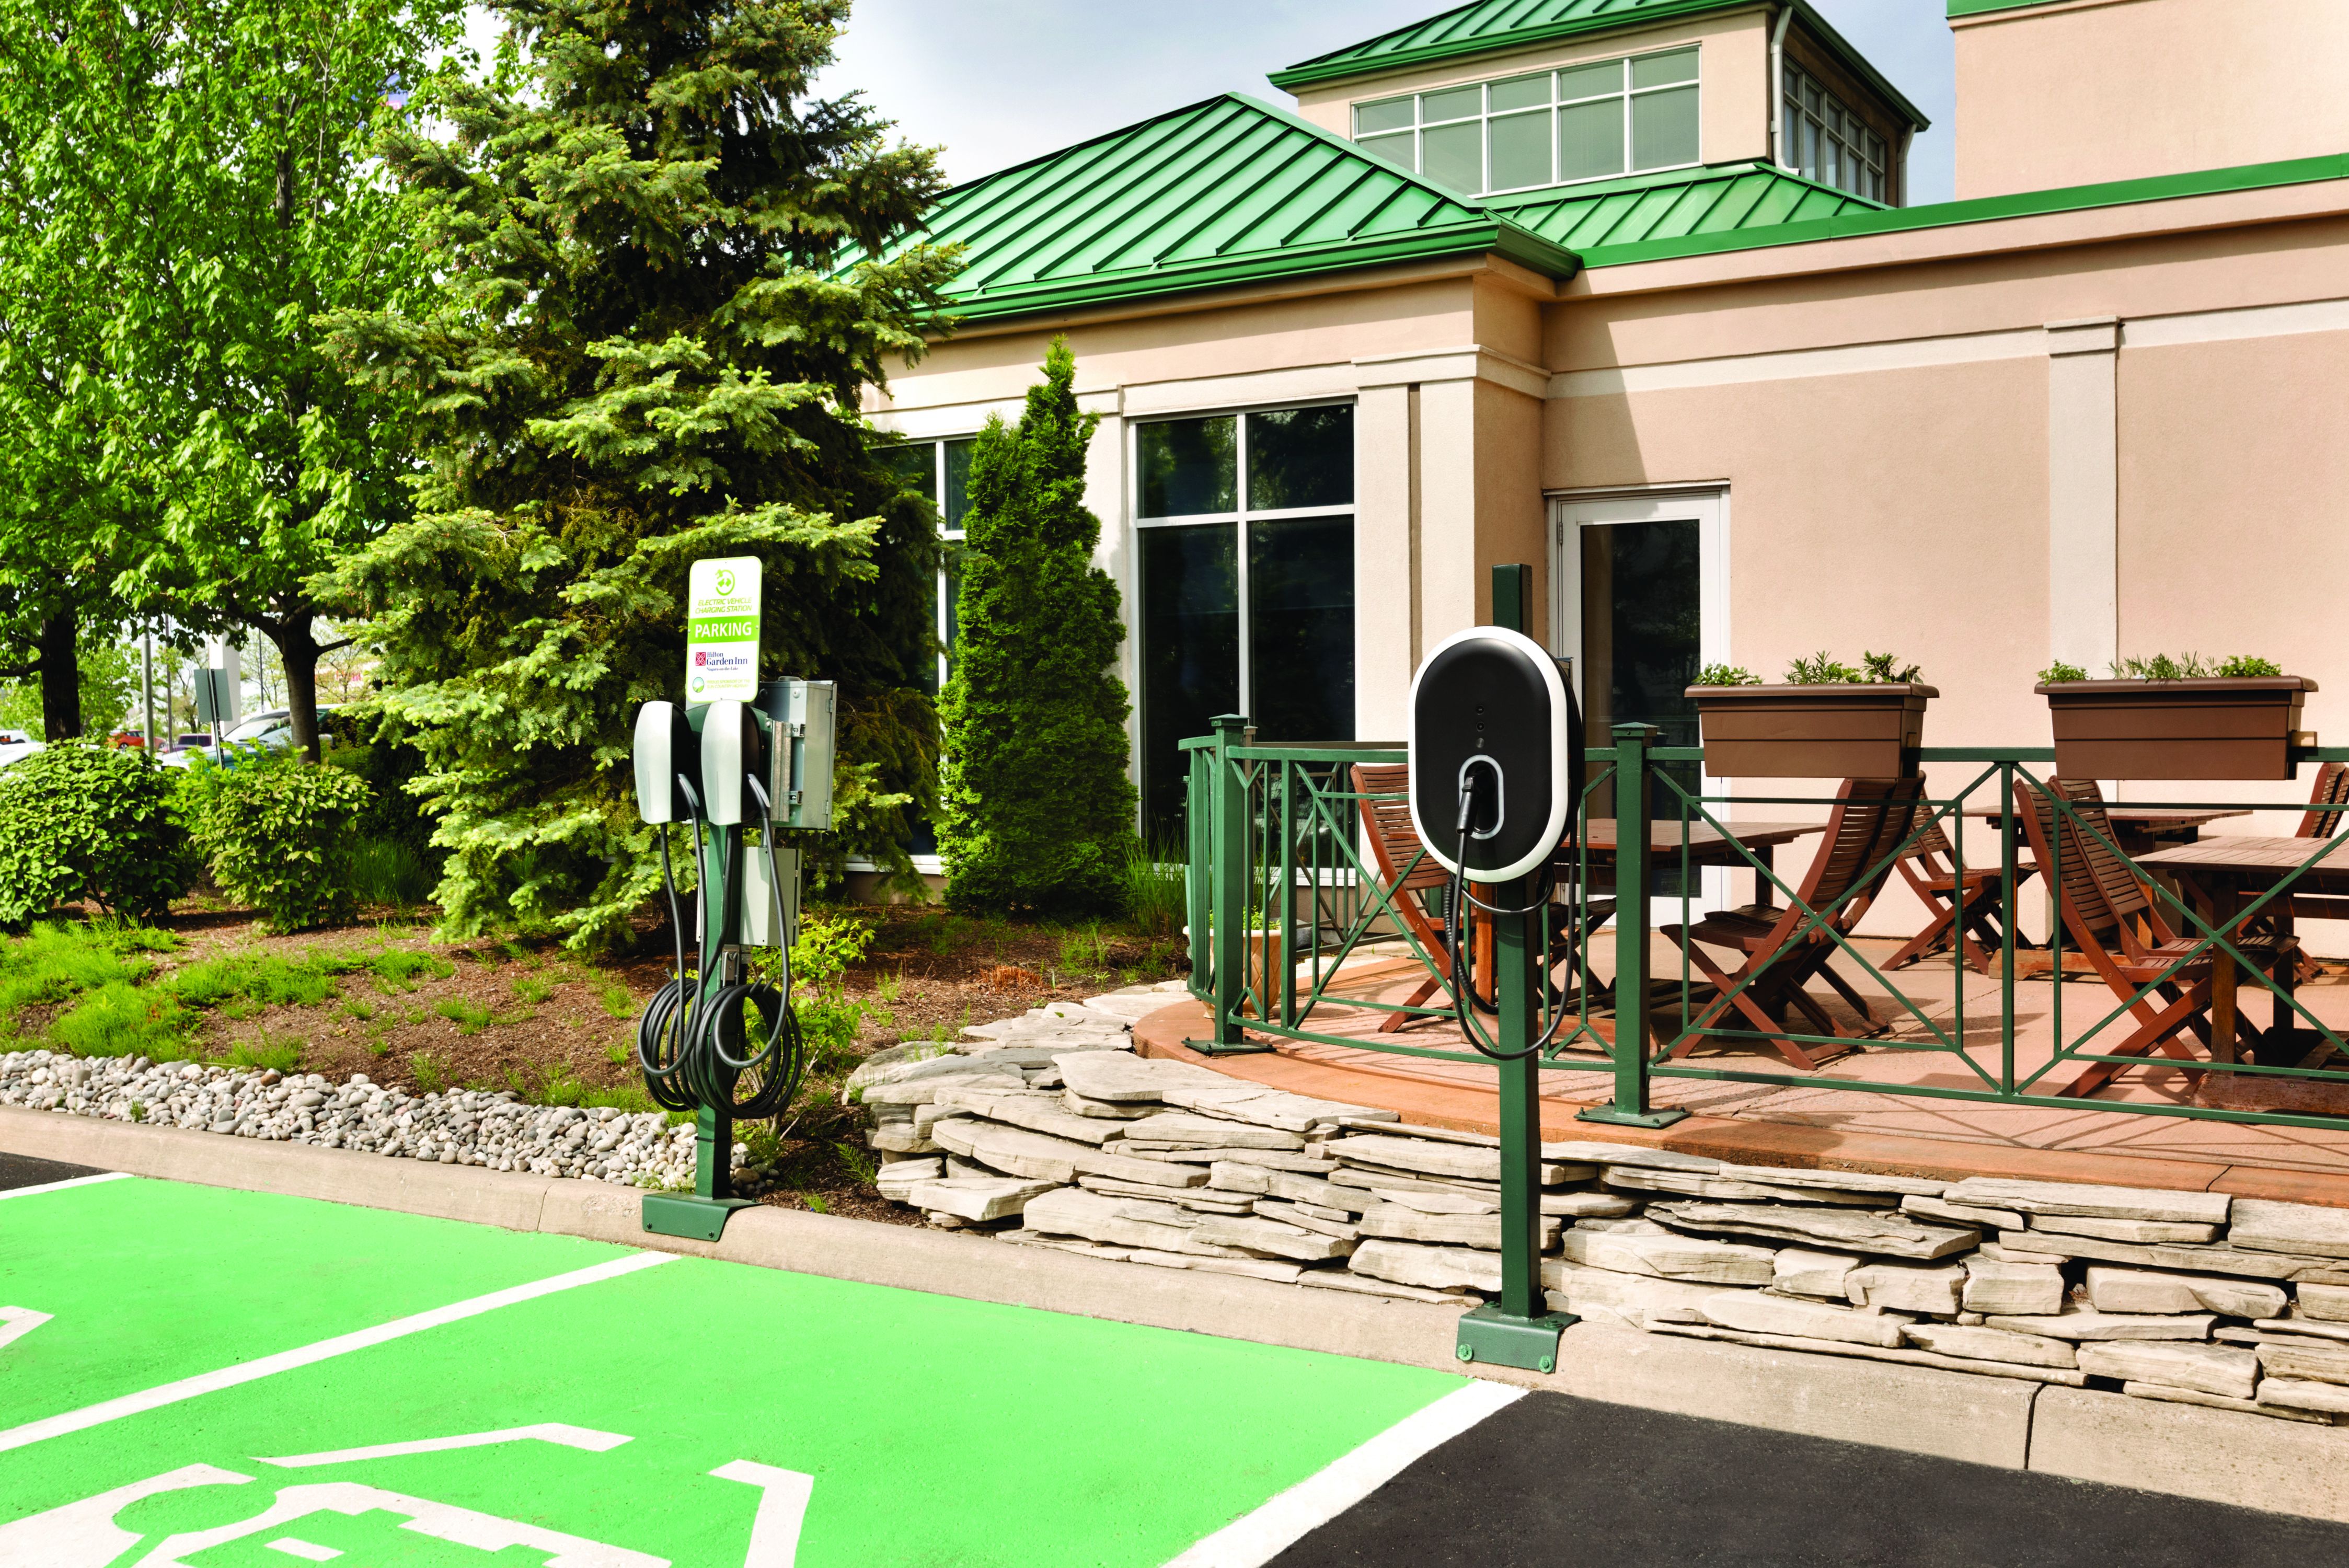 Electric Car Charging Station on Parking Lot by Hotel Exterior